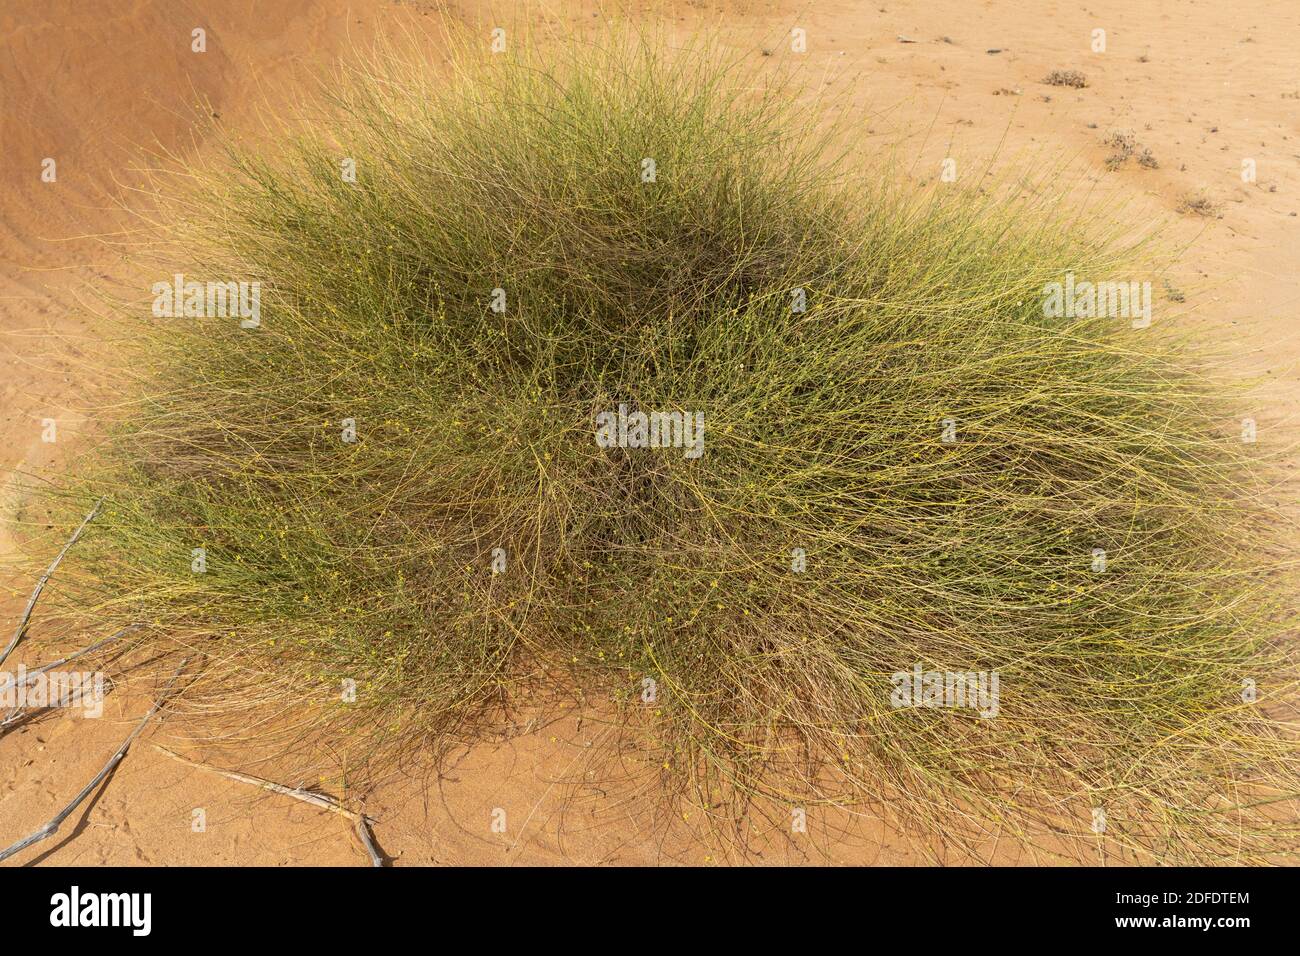 Green resilient desert grass plants with small yellow flowers in the United Arab Emirates. Stock Photo